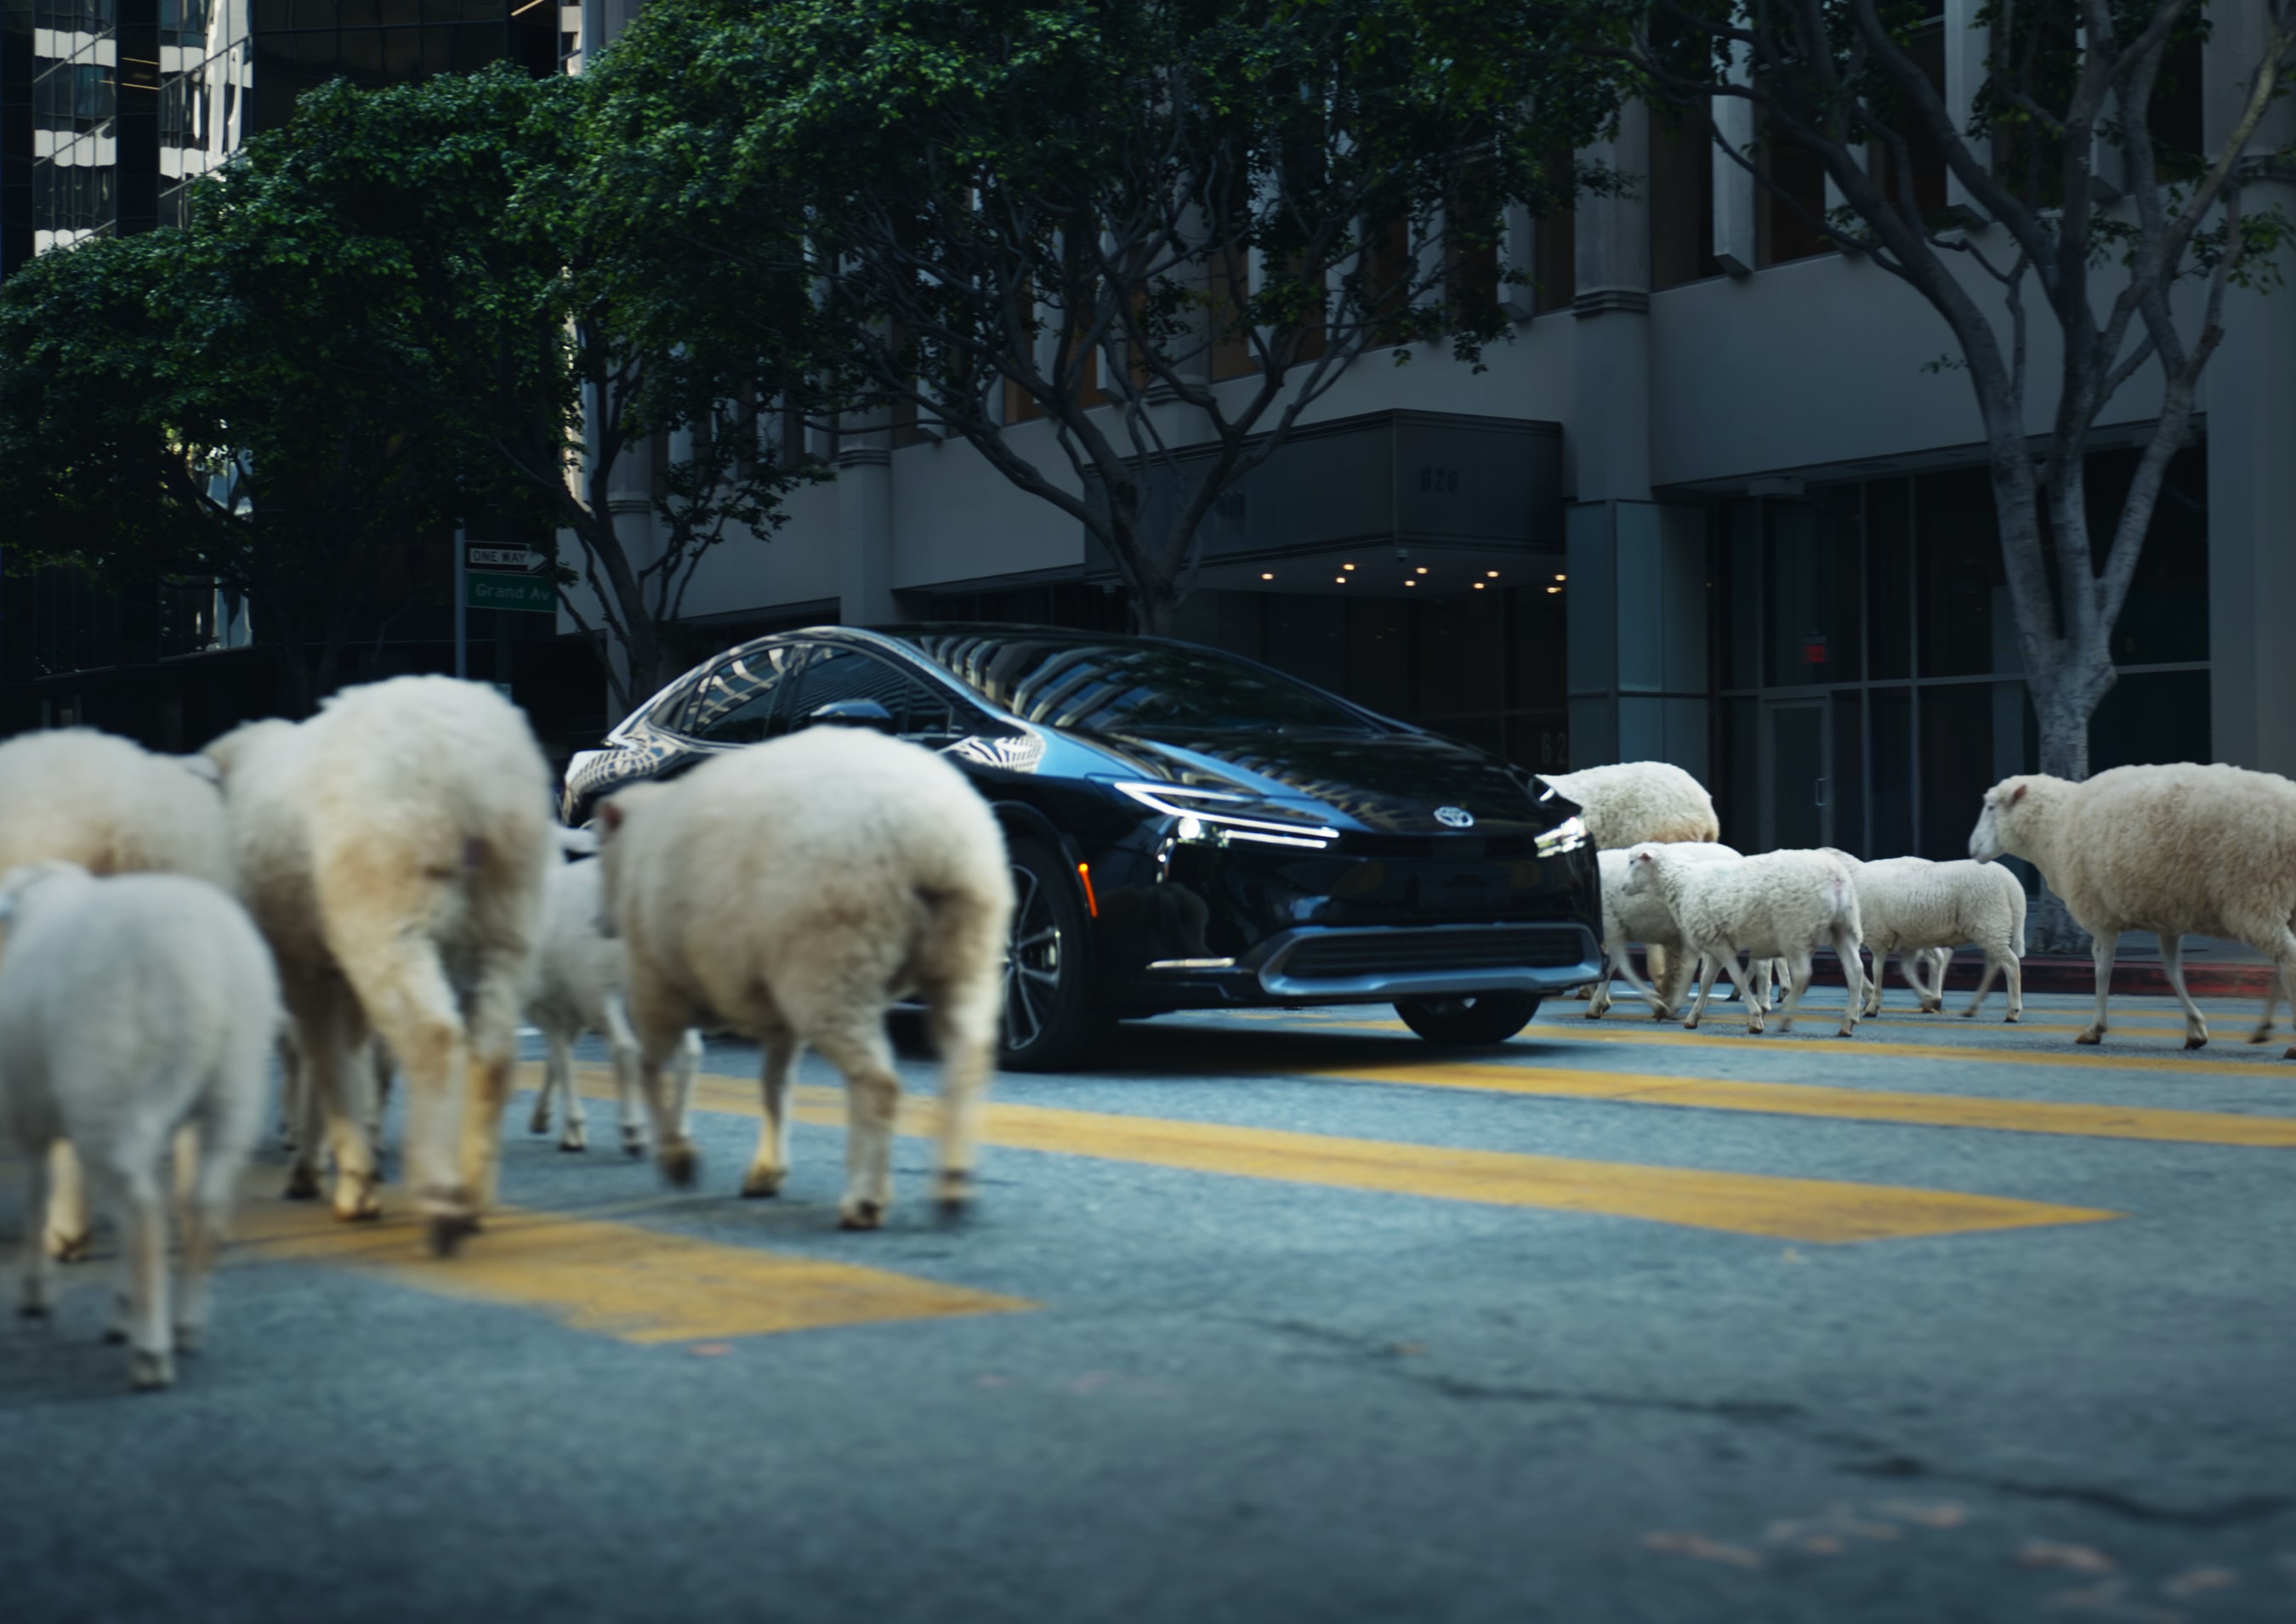 Toyota’s new campaign “This is Prius Now,” conveys the fresh perspective drivers will experience with the remarkable new style and sleek performance of Toyota’s all-new 2023 Prius.